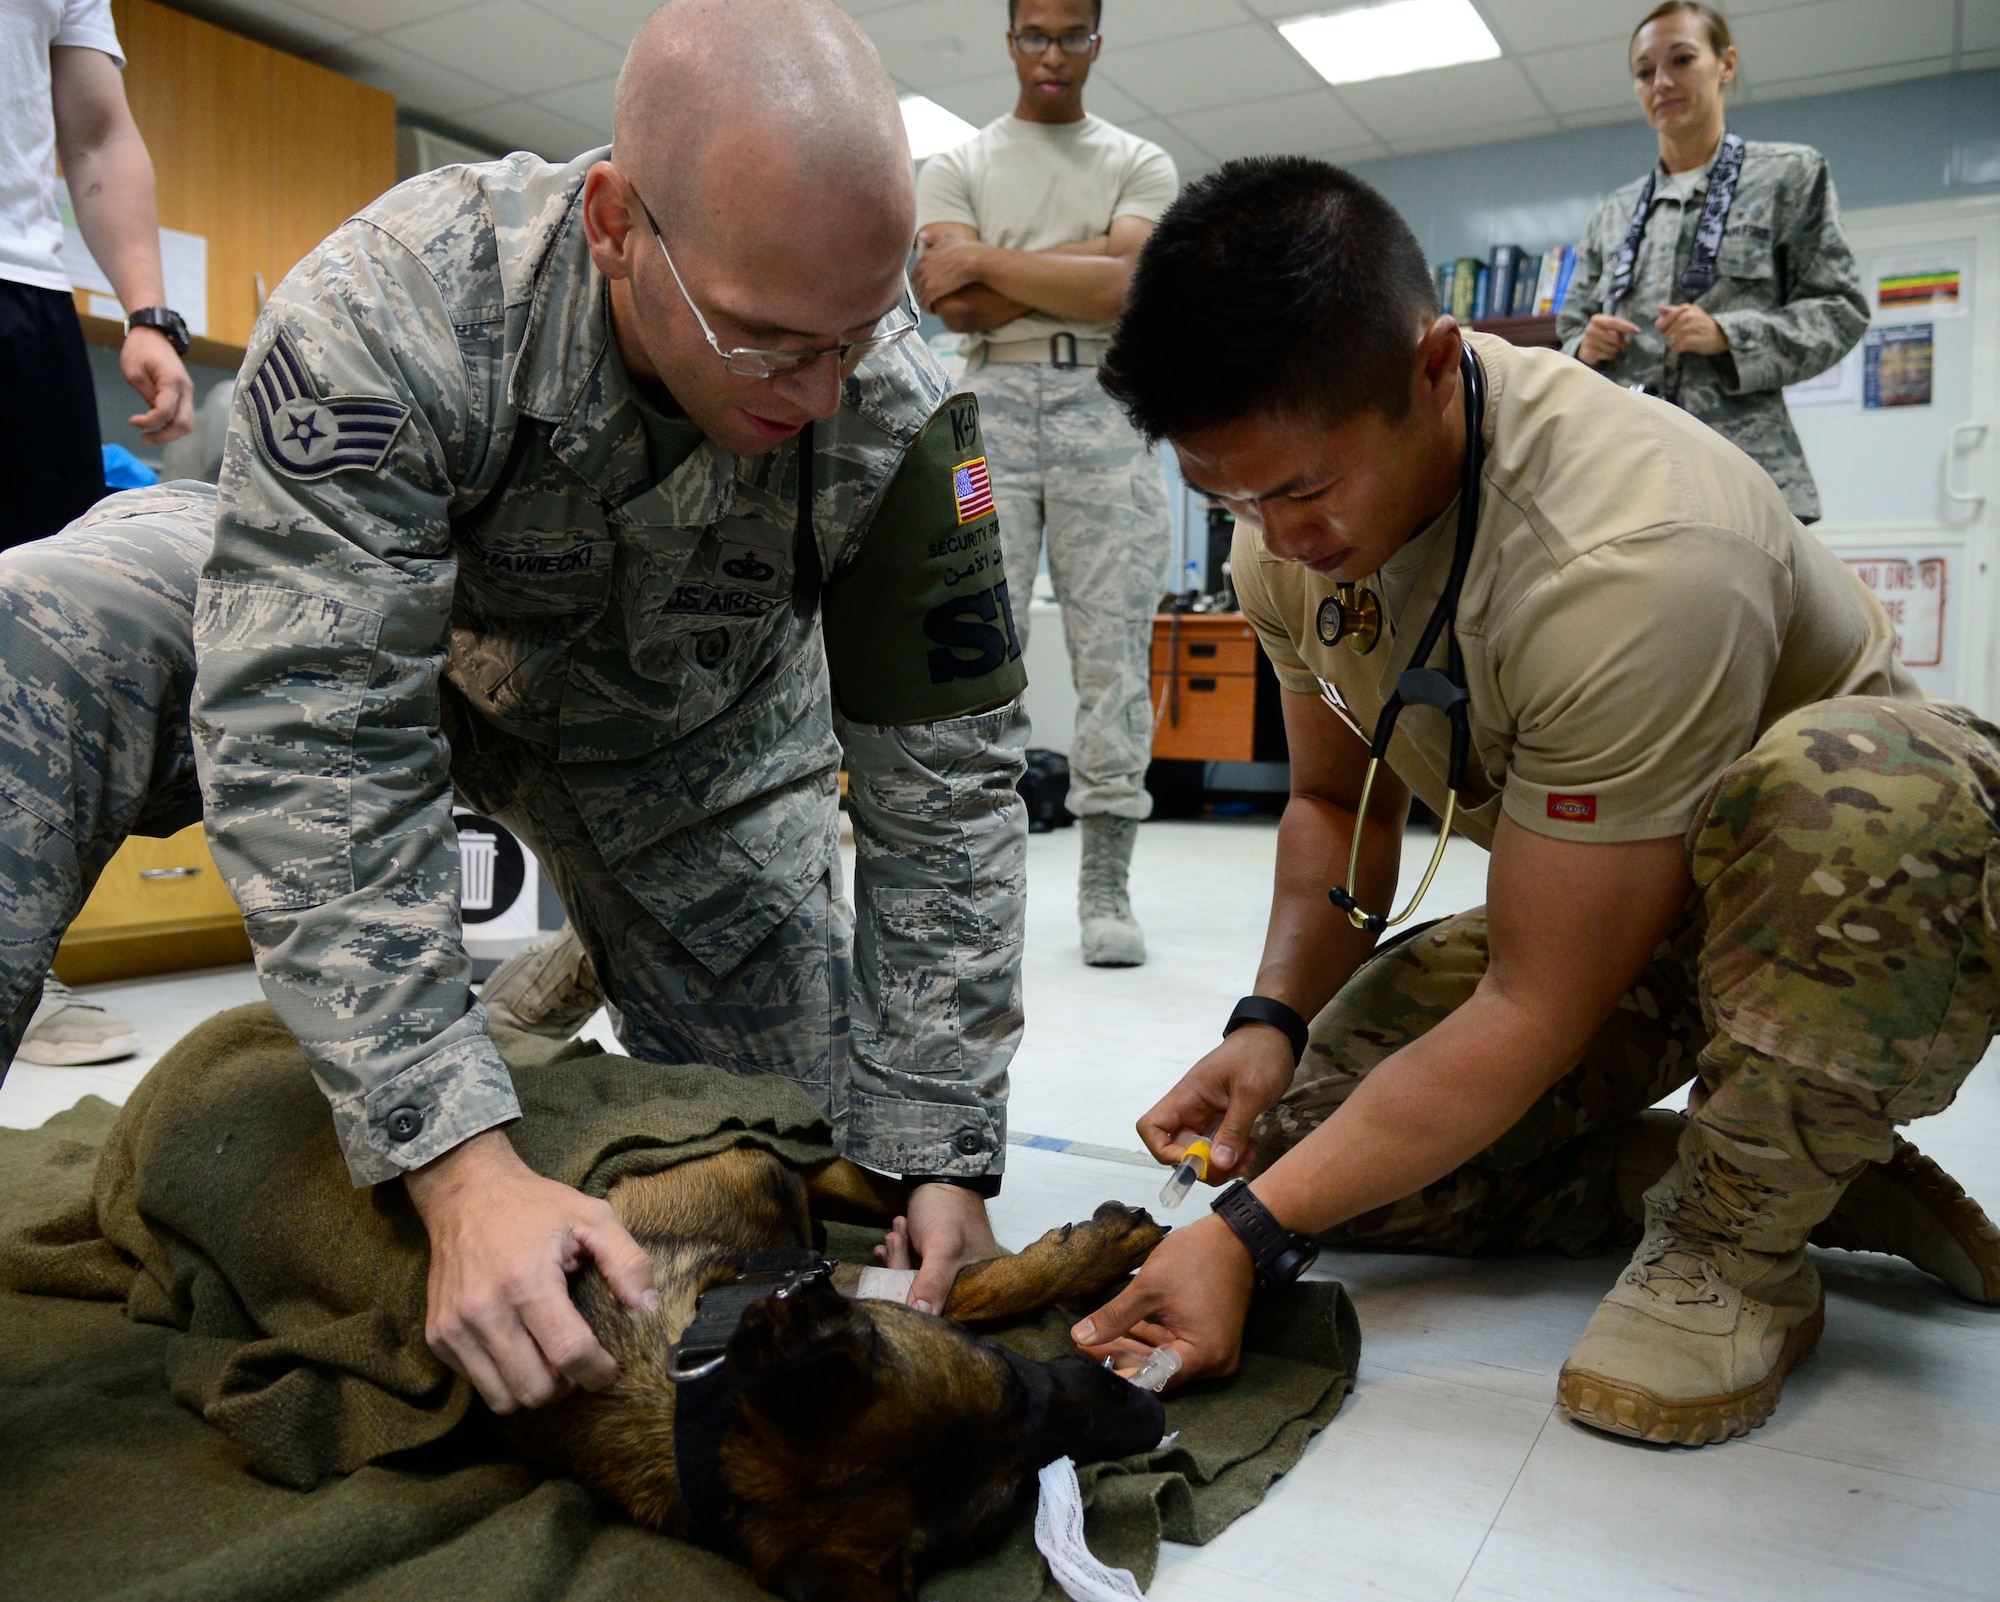 U.S. Air Force Staff Sgt. Kurtis Buchawiecki, , 386th Expeditionary Security Forces Squadron Military Working Dog handler, soothes FFrida,  386th ESFS MWD, while U.S. Army Capt. Raymond Wong, 463rd Military Detachment Veterinary Service veterinary officer in charge, removes the intubation tube after a dental cleaning at an undisclosed location in Southwest Asia Aug. 27, 2015. Dogs come with a set of specialized sensory organs enabling them to extract vital information from their environment making them ideal for military operations. (U.S. Air Force photo by Senior Airman Racheal E. Watson/Released)